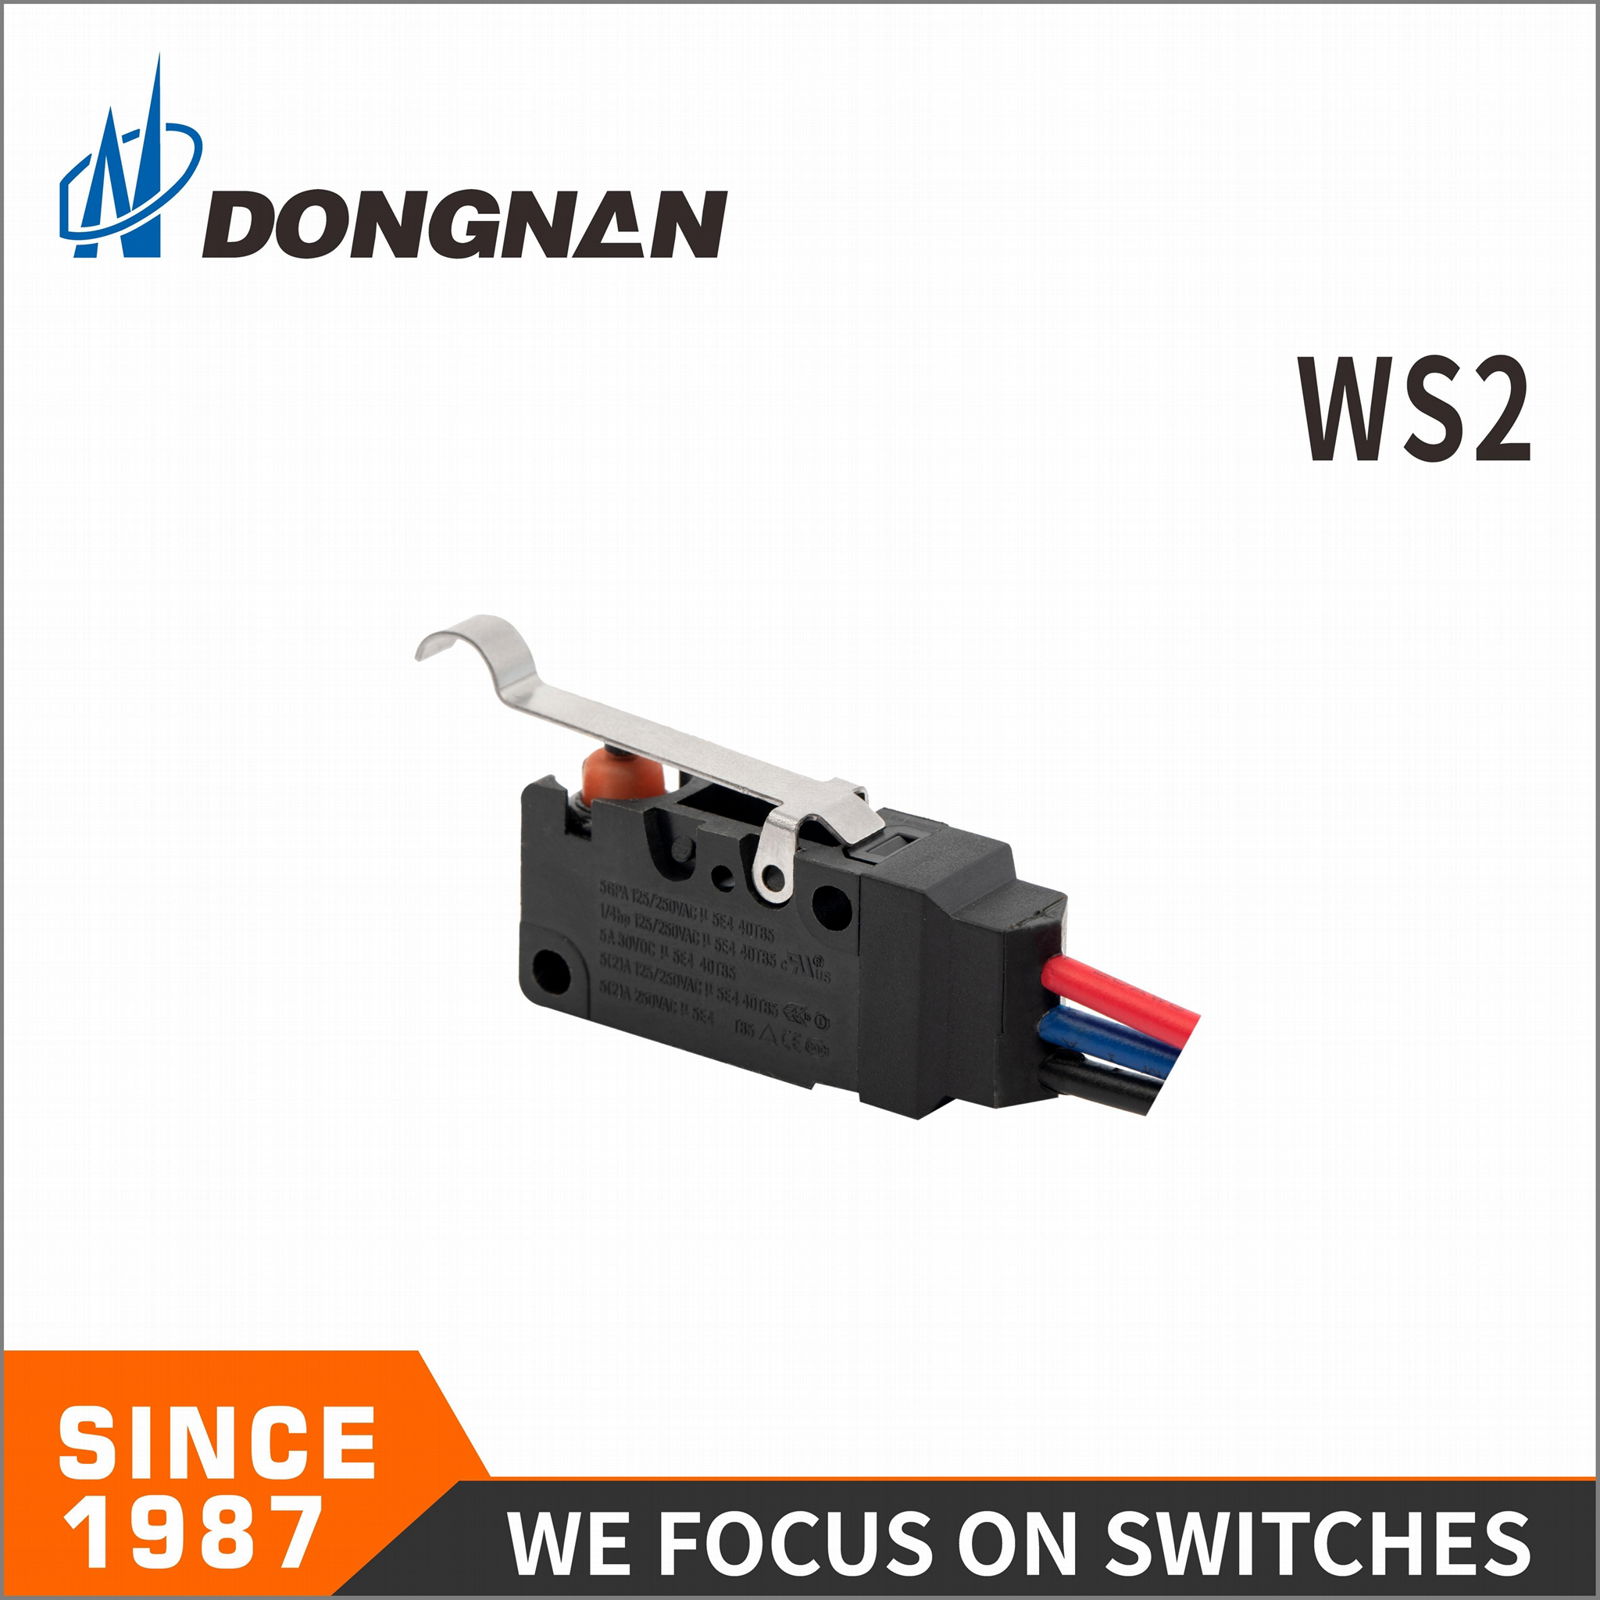 Dongnan Sensitive Quick Connect Power Waterproof Micro Switch for Home Appliance